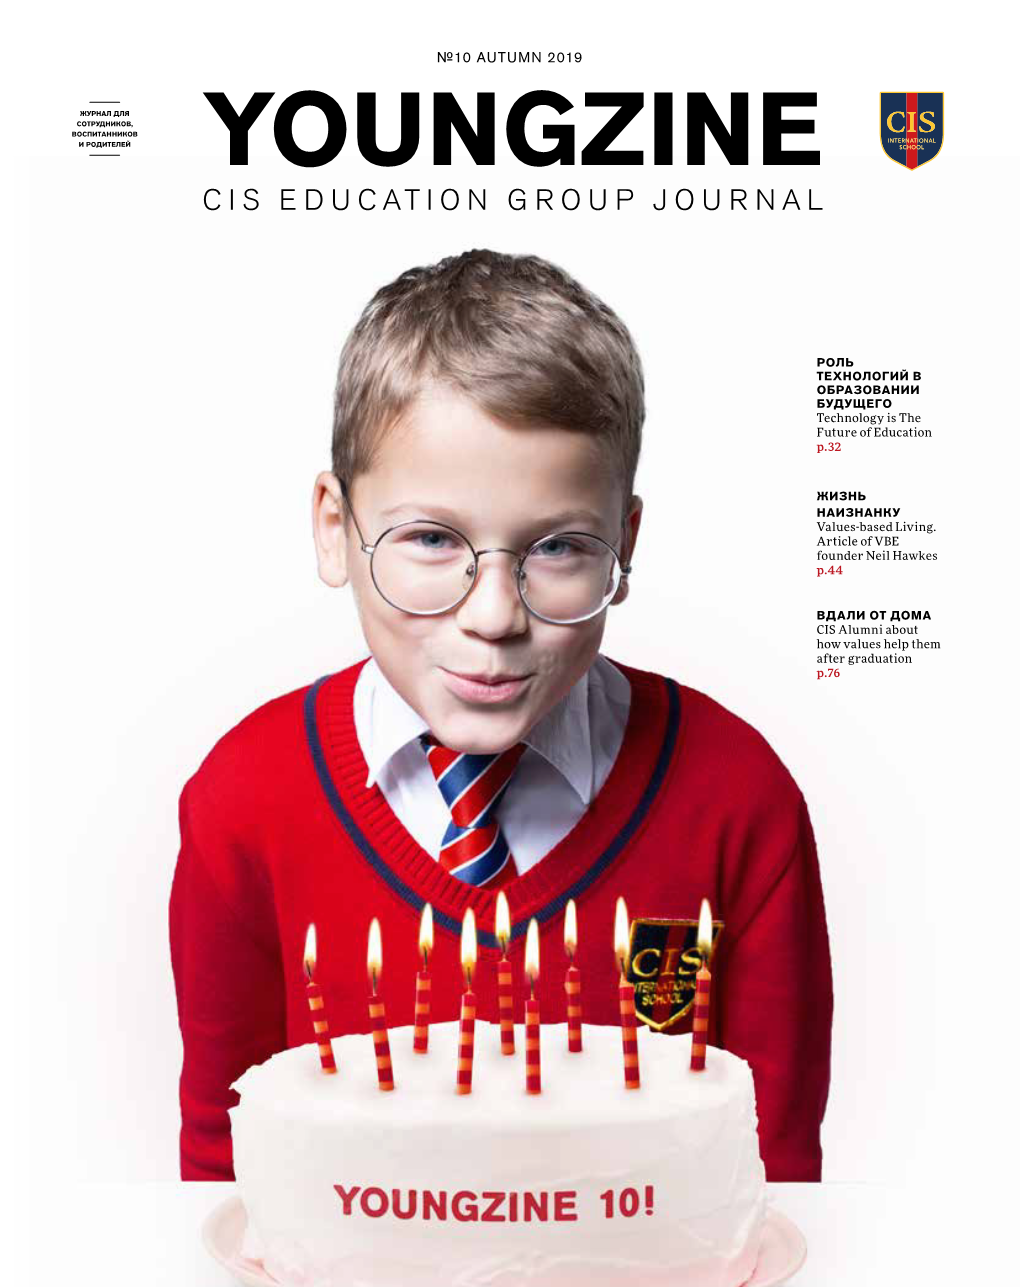 Youngzine Cis Education Group Journal